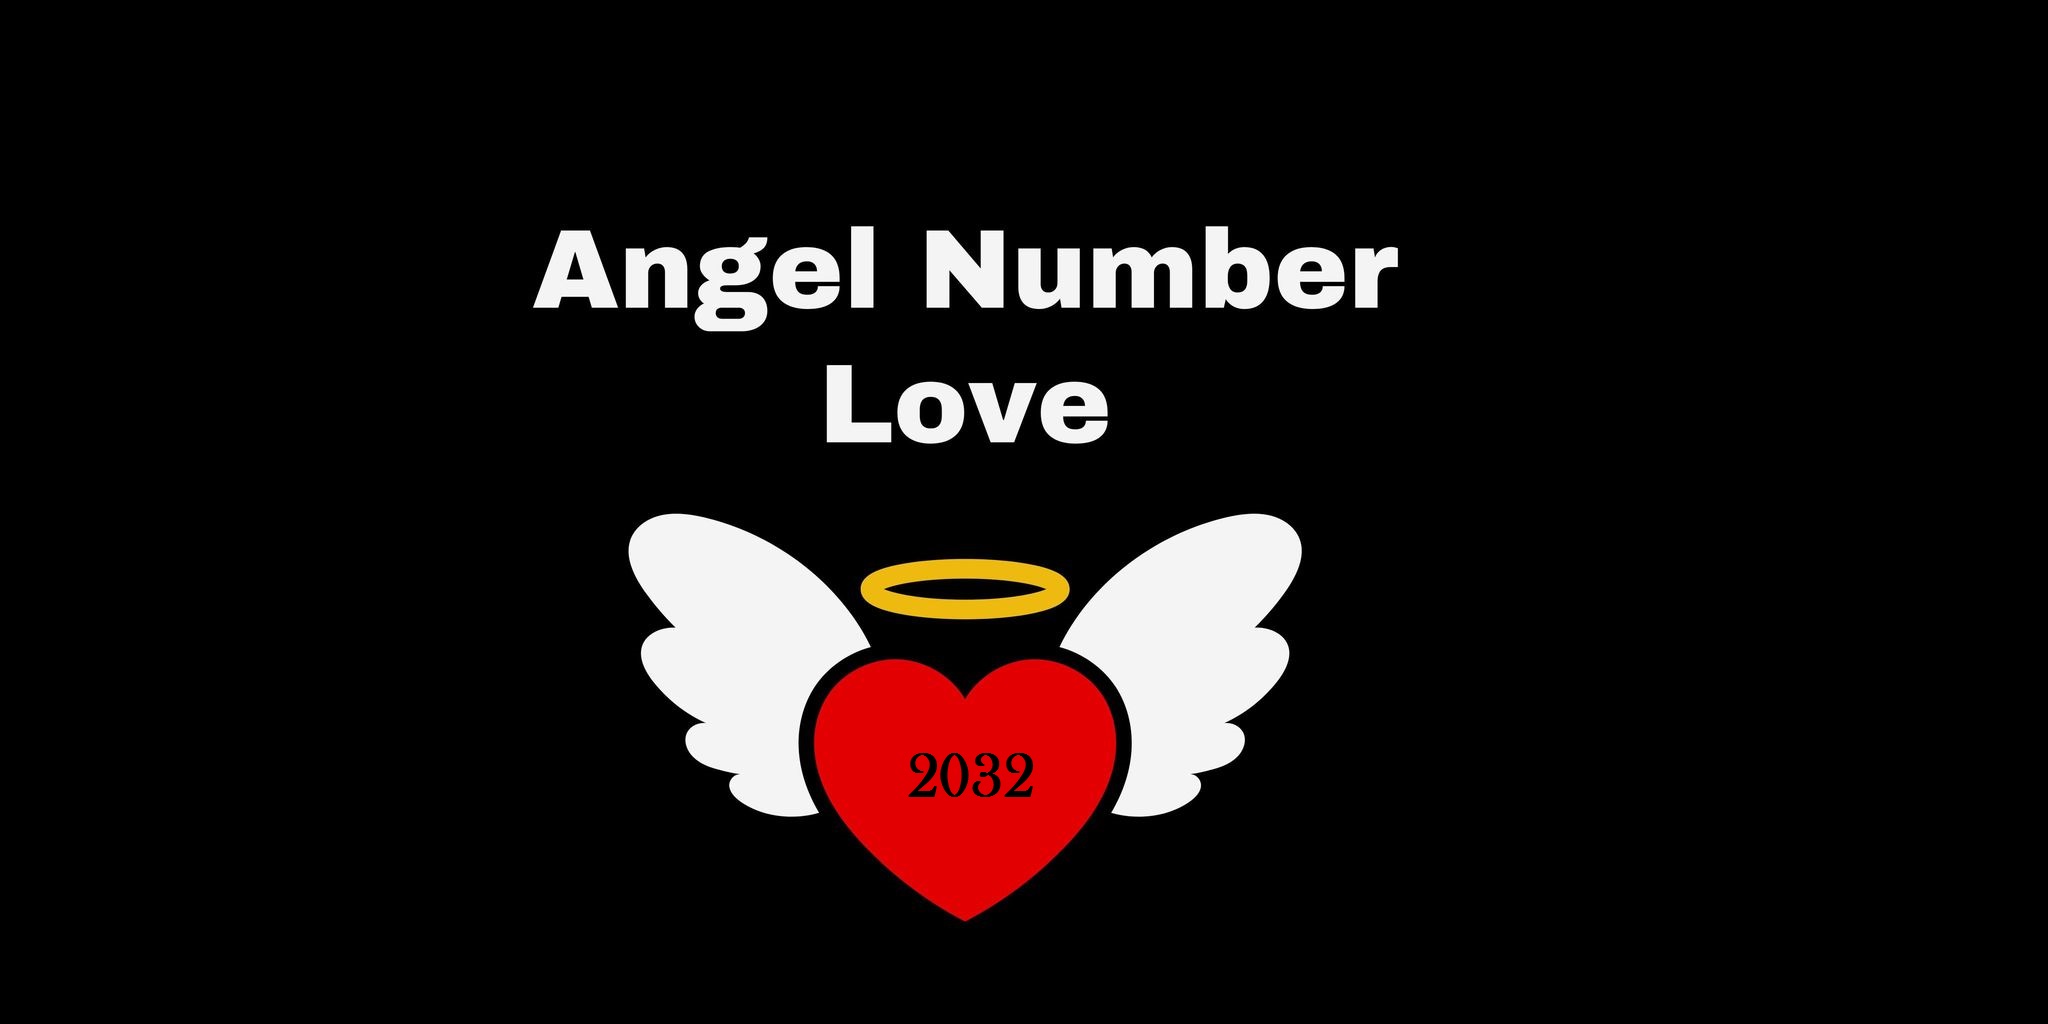 2032 Angel Number Meaning In Love